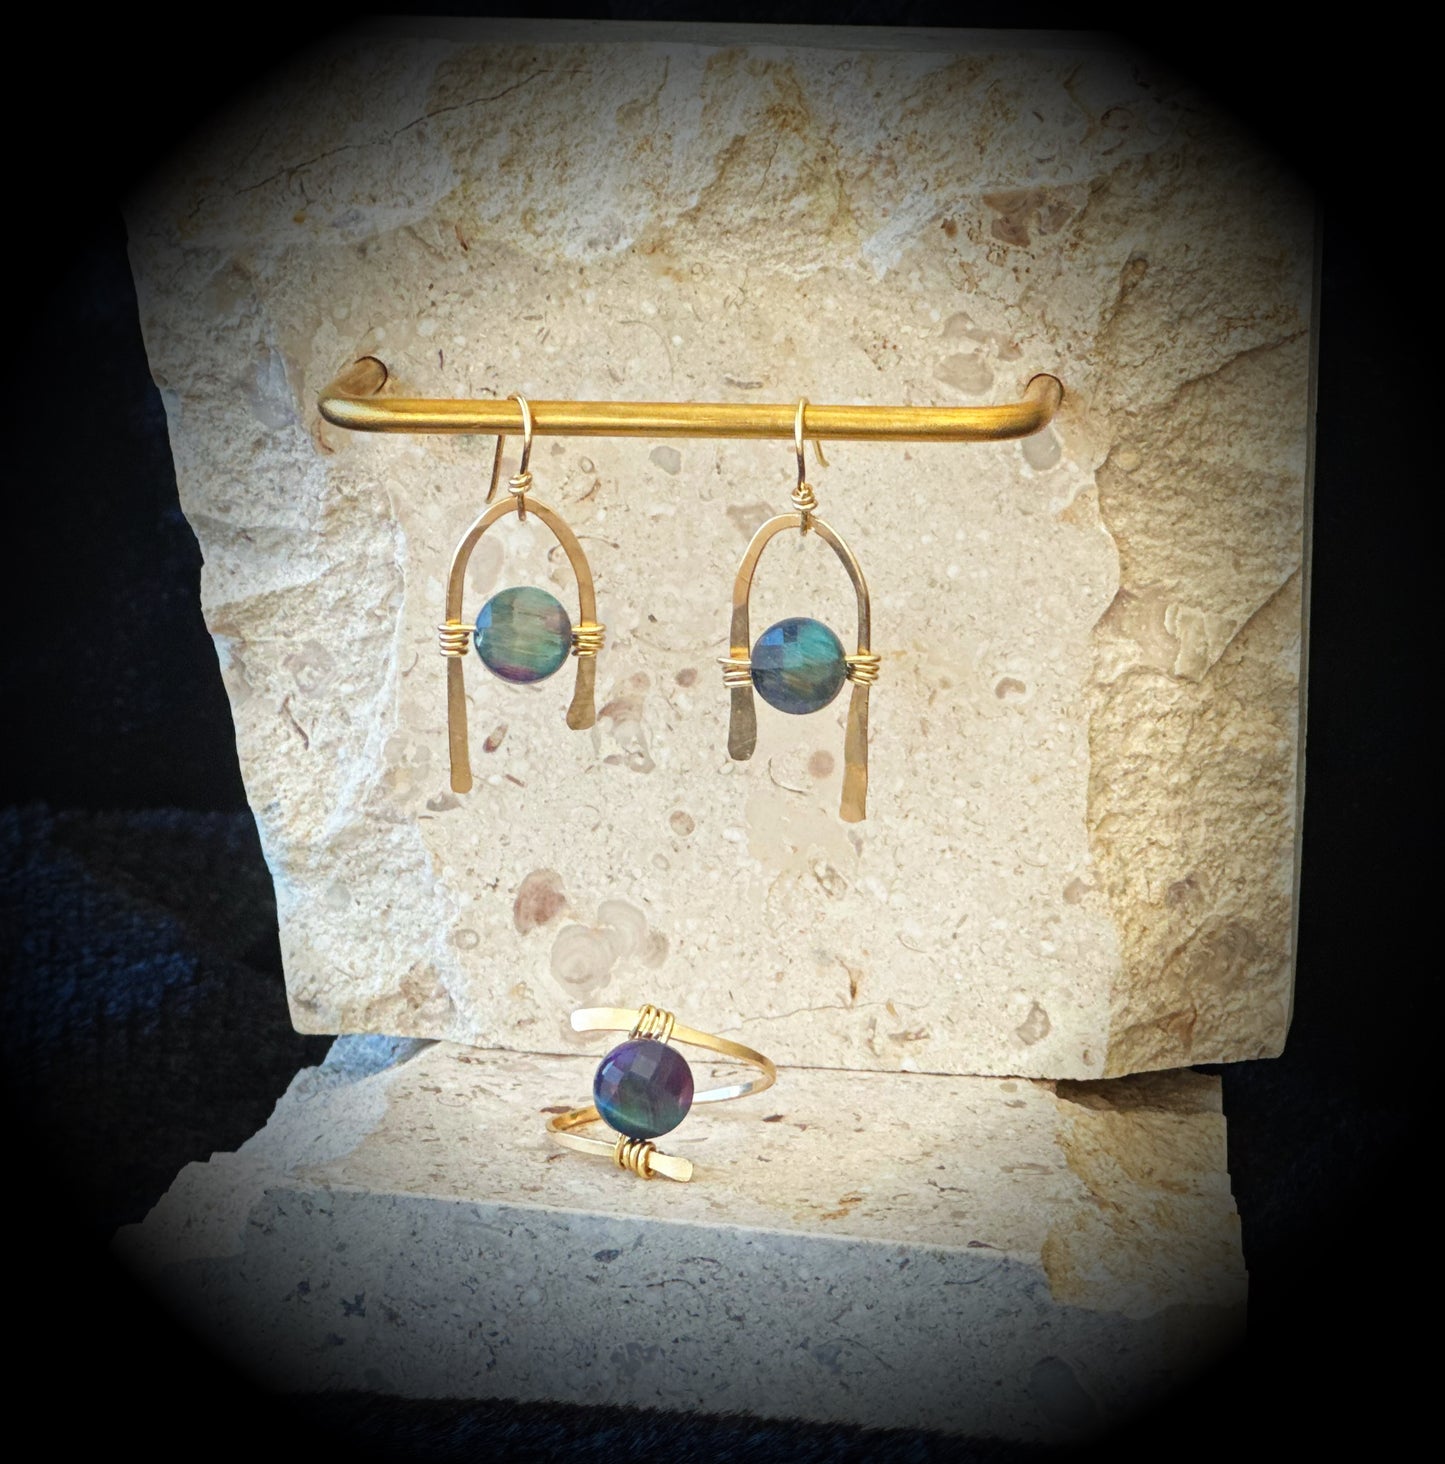 Wire Forming with Gemstones, Ages 18+: May 19th